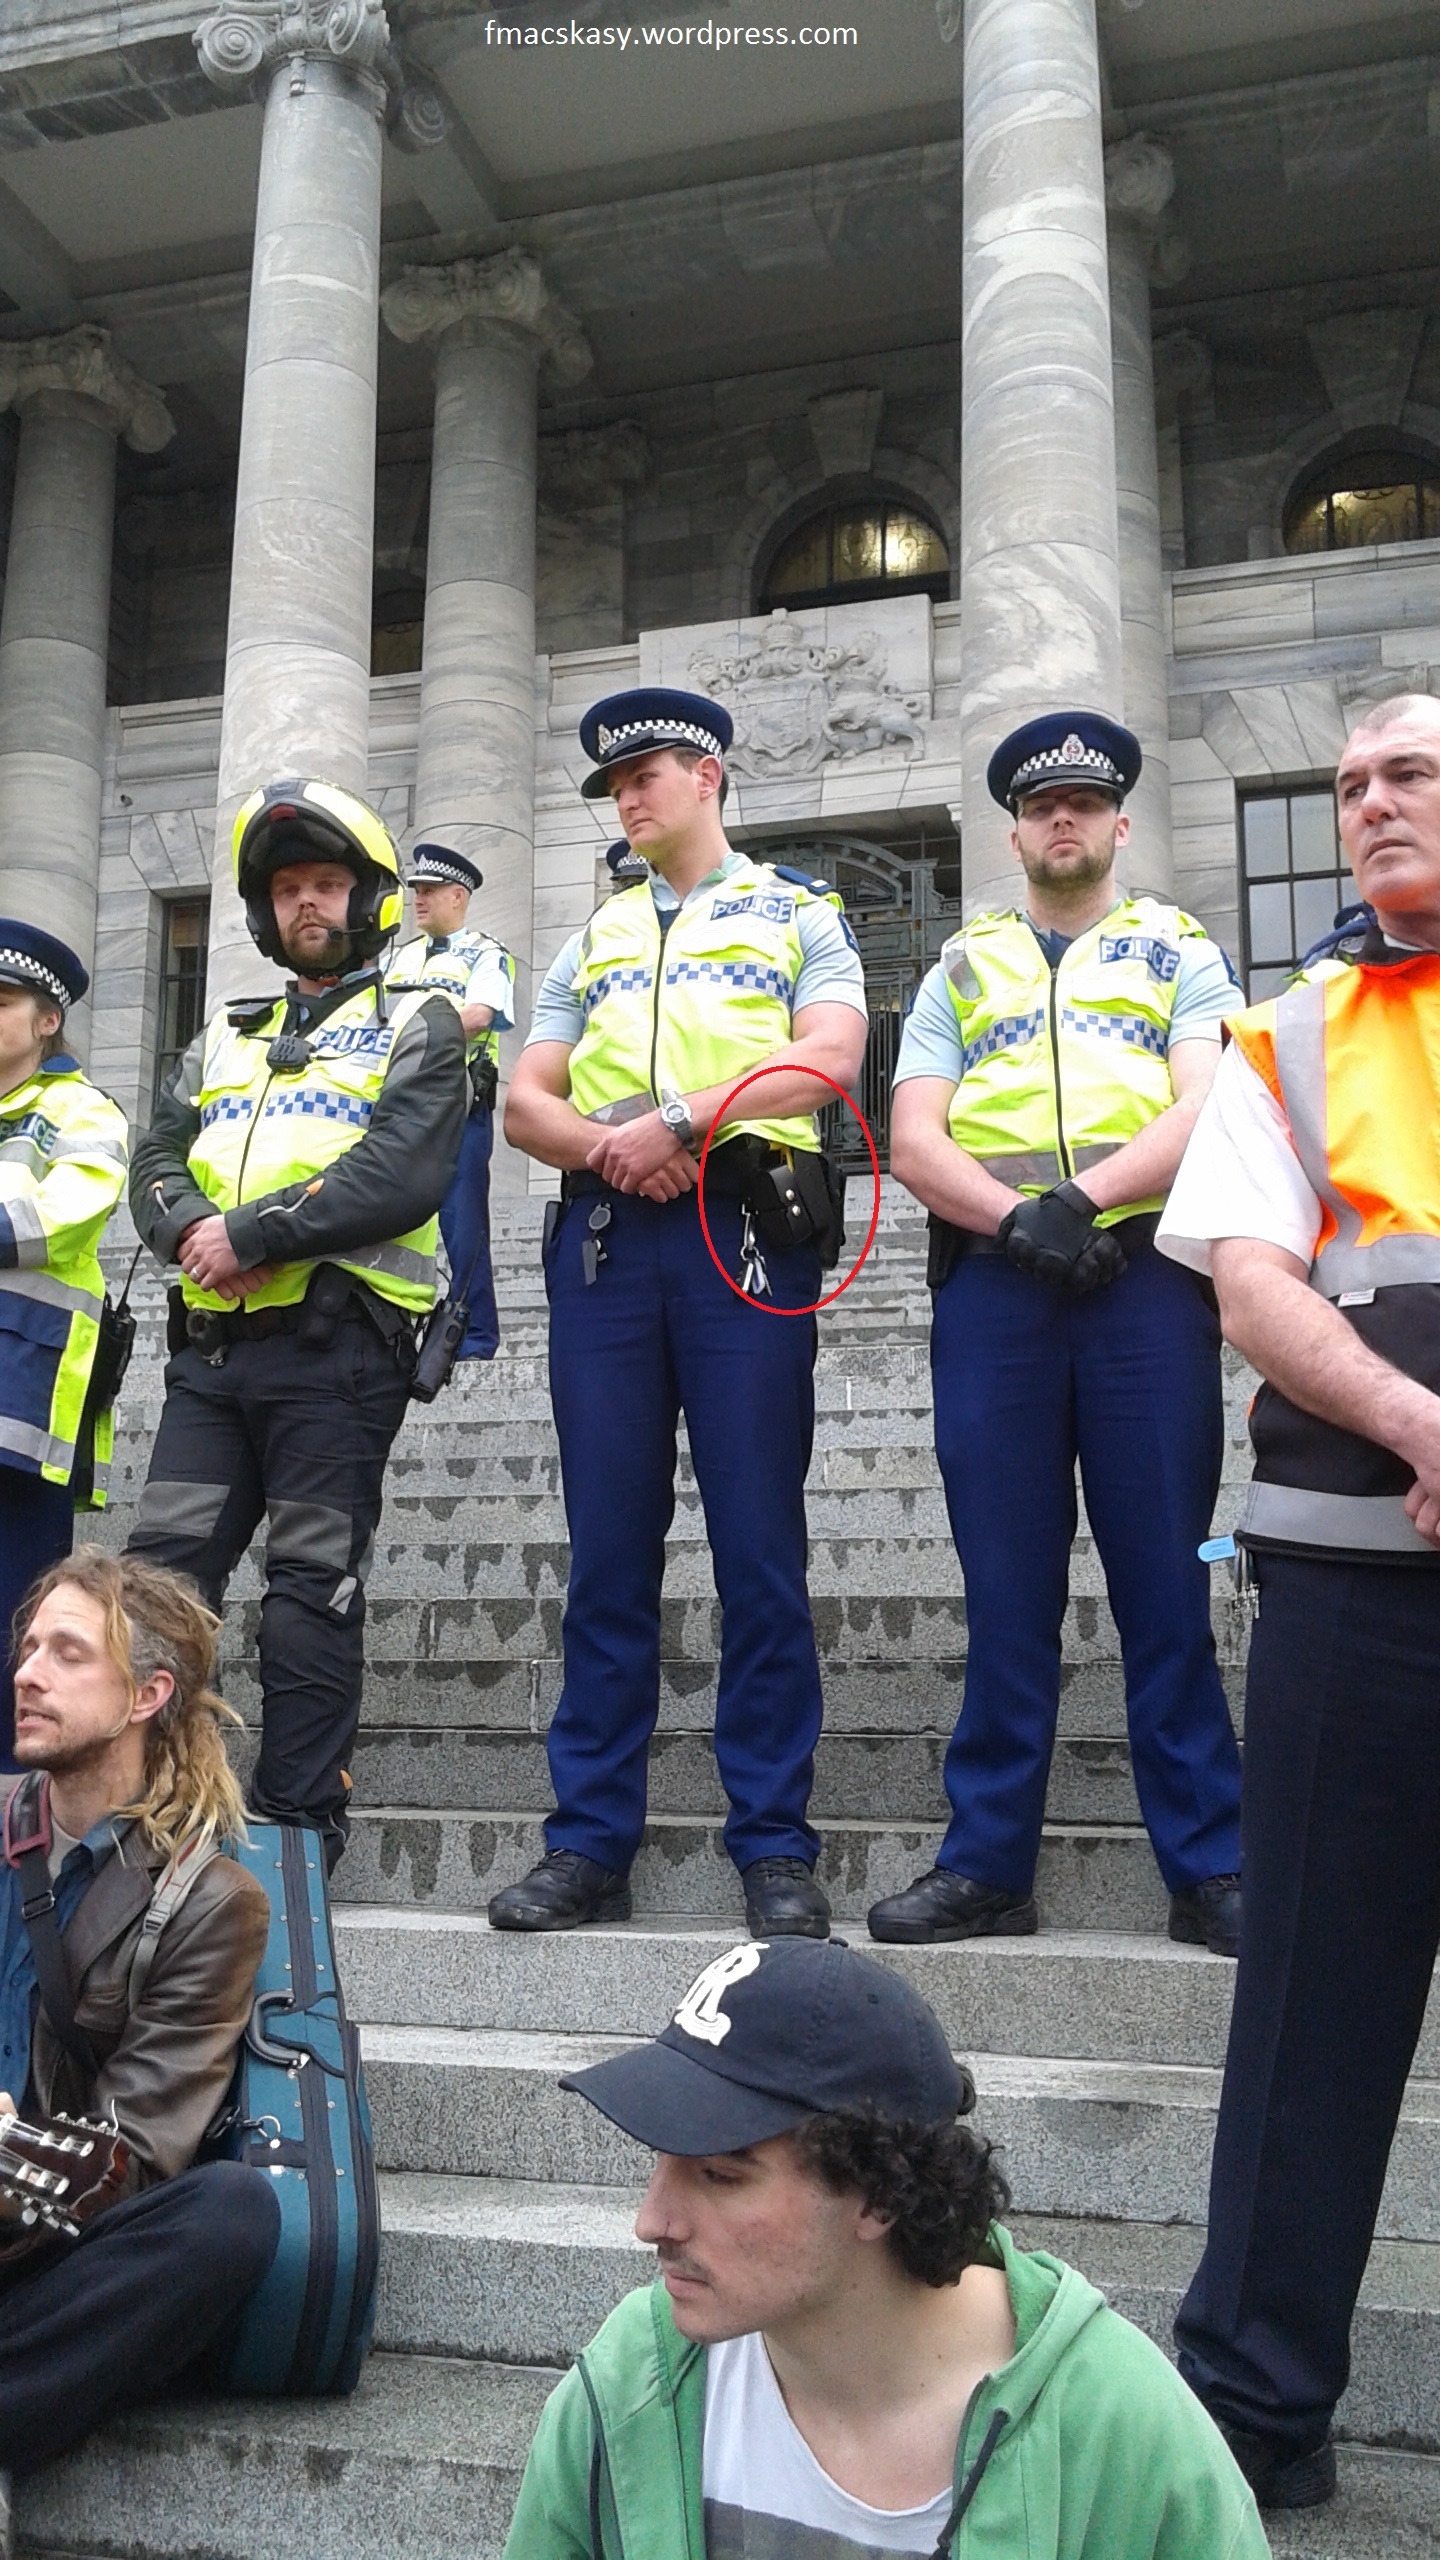 TPPA - trans pacific partnership agreement - protest march - wellington - 15 august 2015